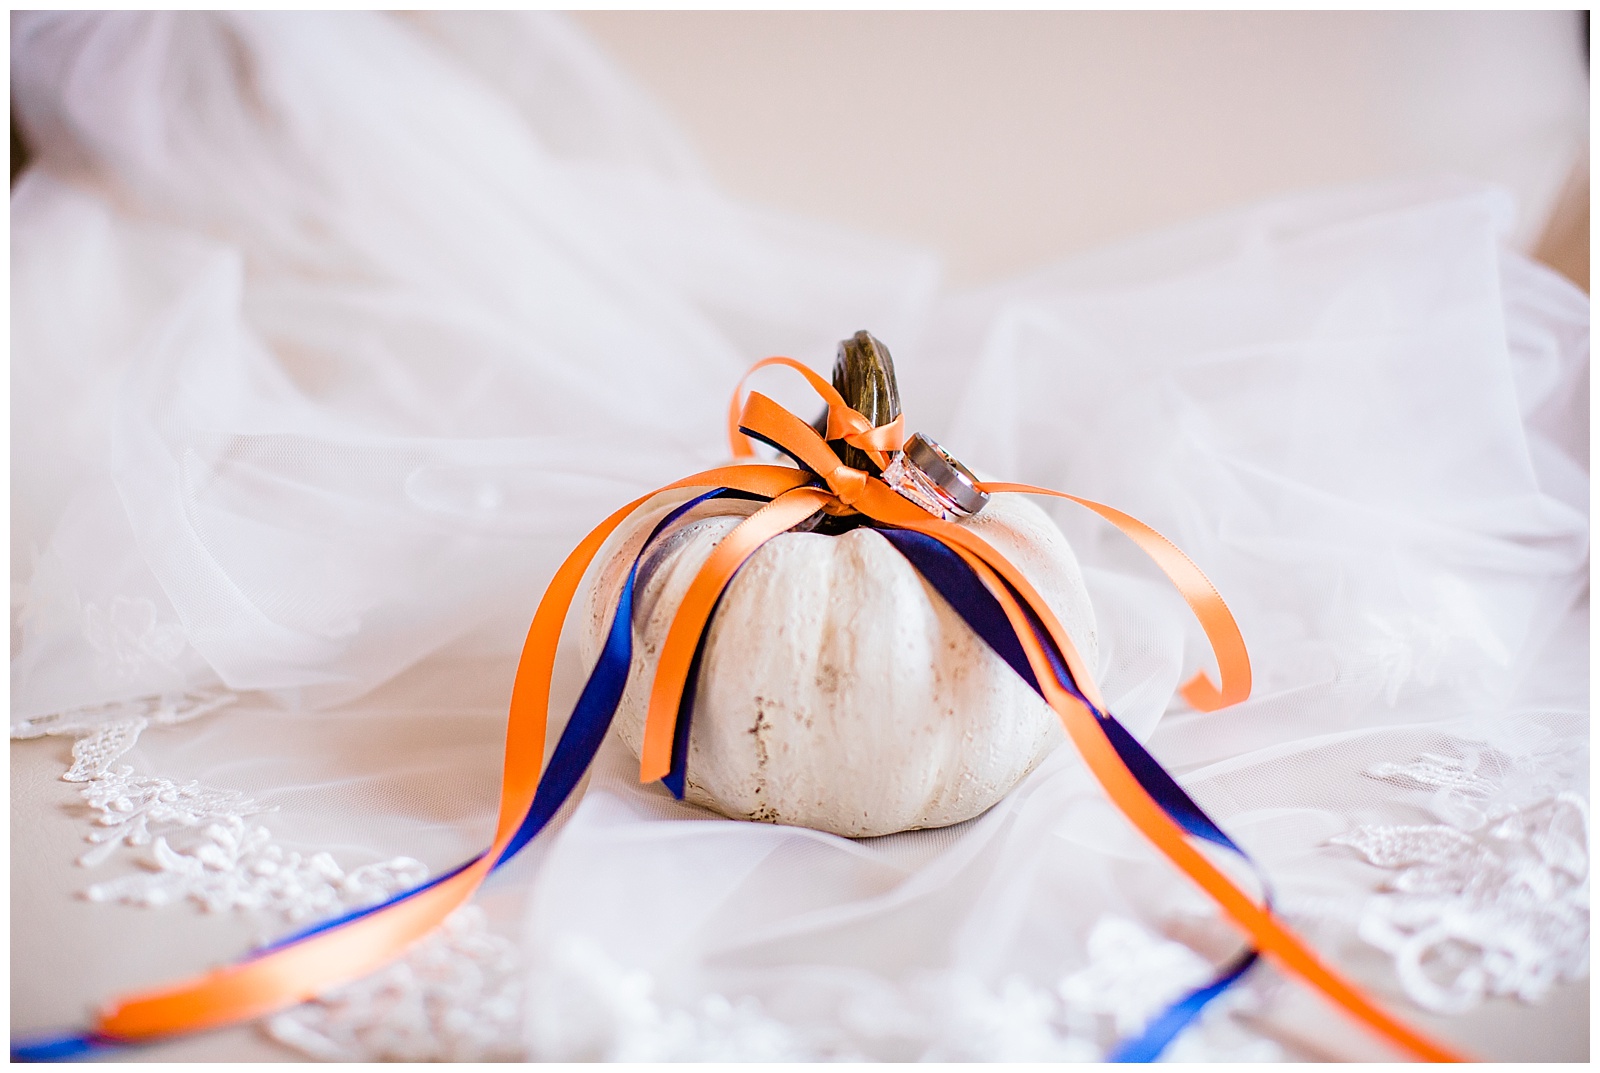 White pumpkin sitting on wedding veil with orange and blue ribbons tied around it.